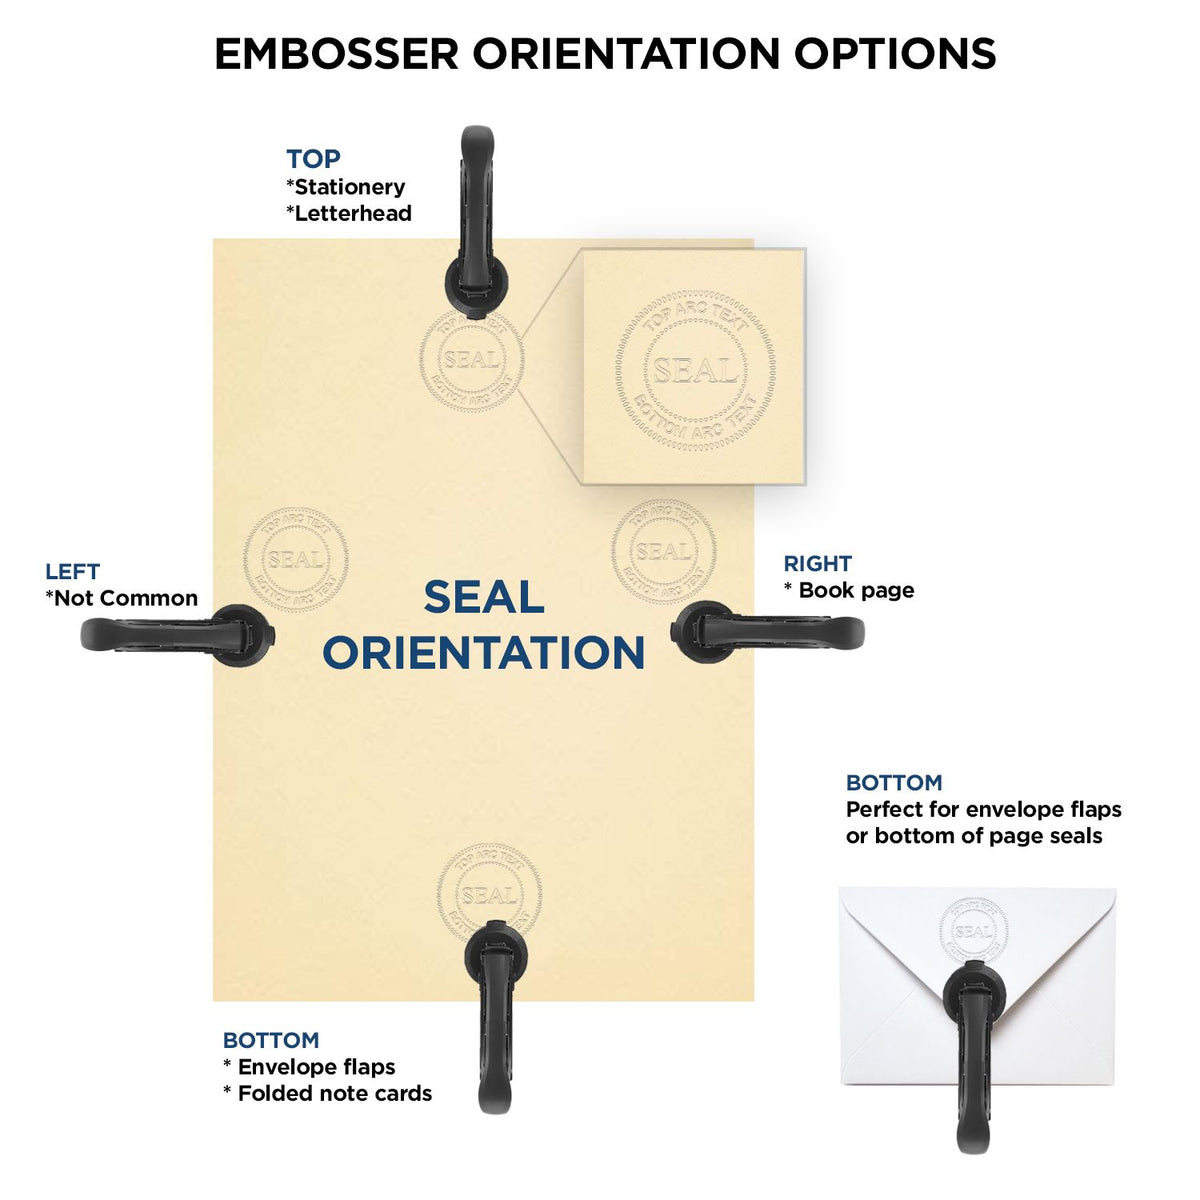 An infographic for the Heavy Duty Cast Iron Maryland Land Surveyor Seal Embosser showing embosser orientation, this is showing examples of a top, bottom, right and left insert.